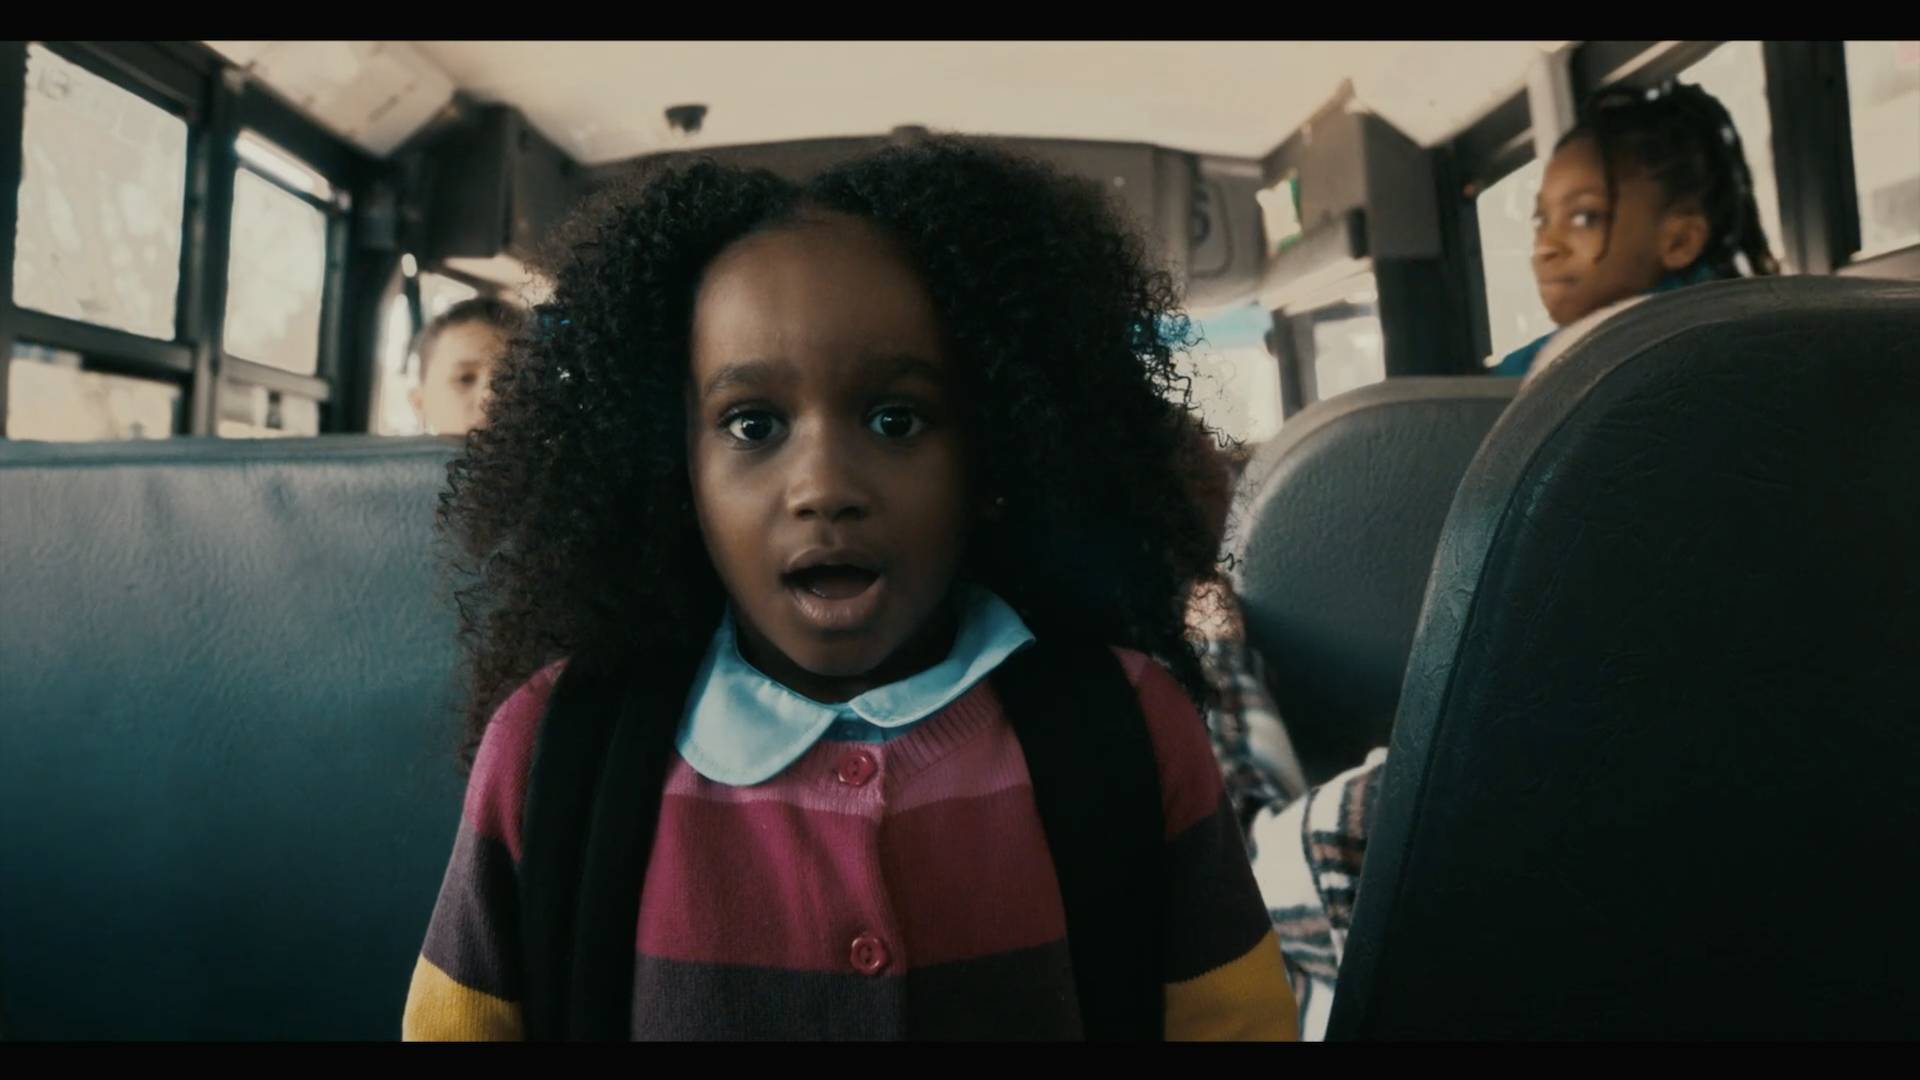 A young girl in a sweater looks surprised on her school bus.